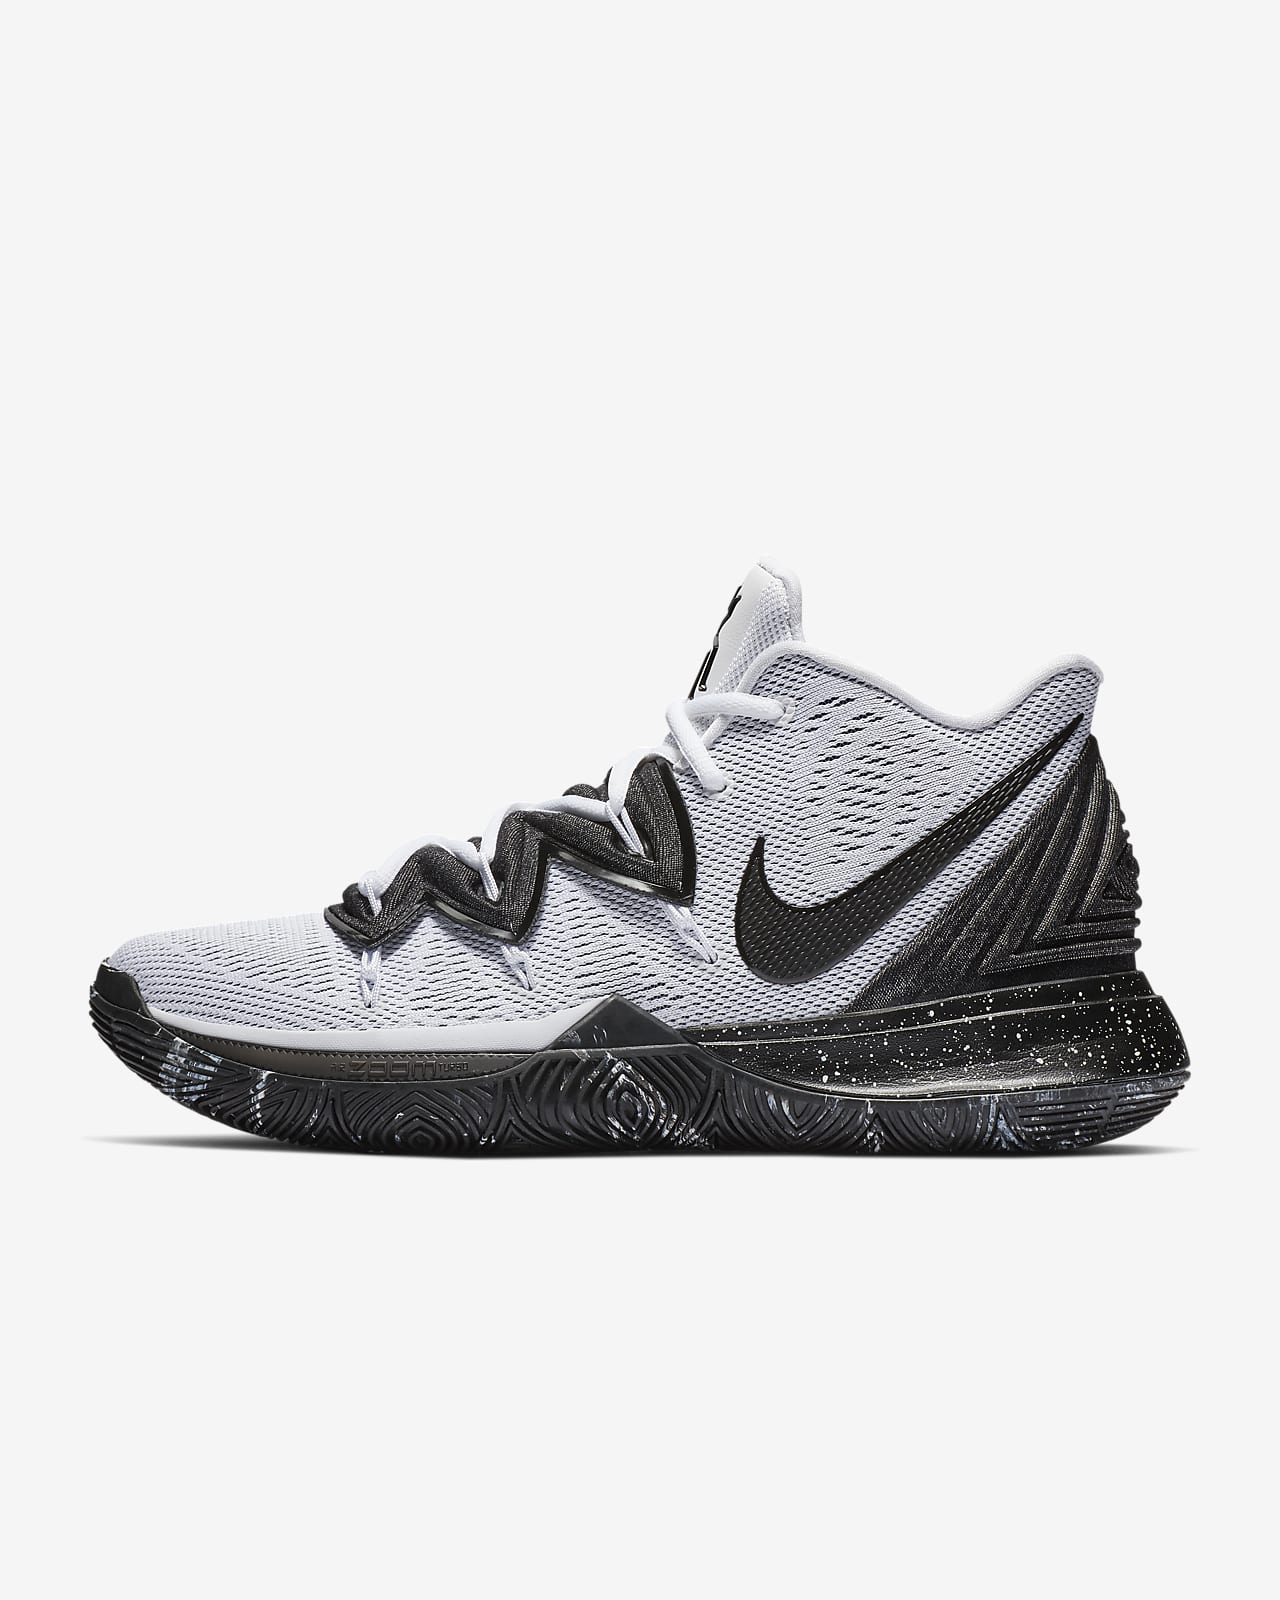 kyrie 5 shoes